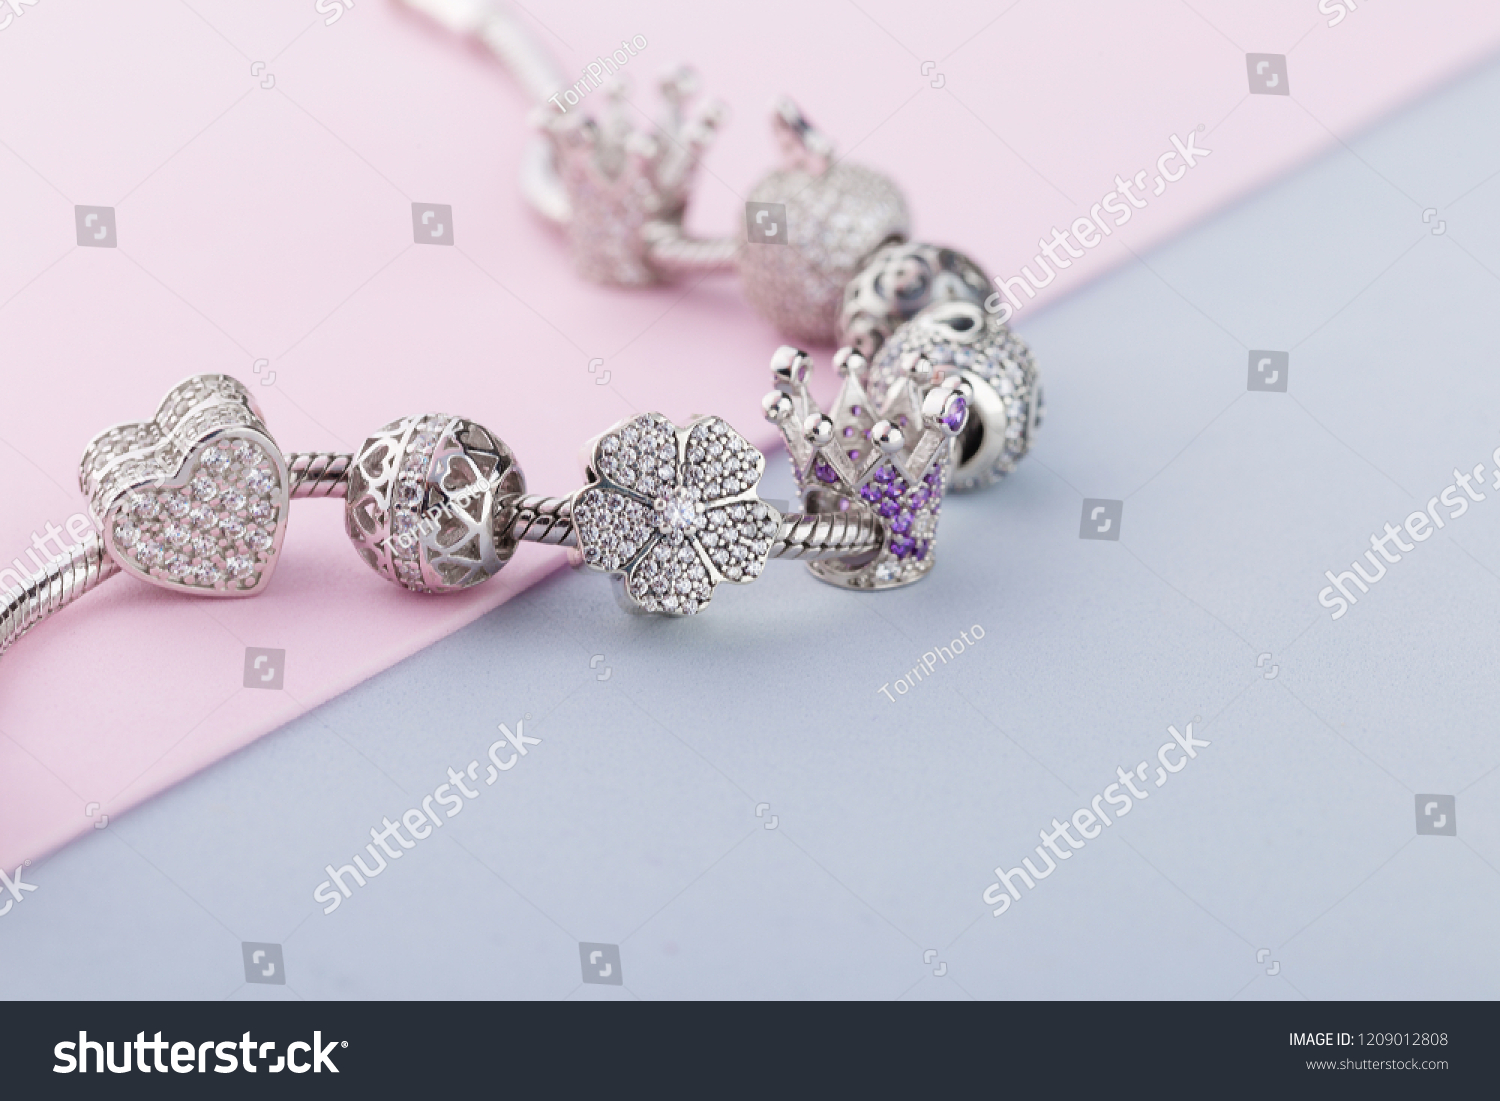 Bracelet with silver charm beads with gems. Flower, crown, ball, heart beads.  Product concept for jeweler #1209012808